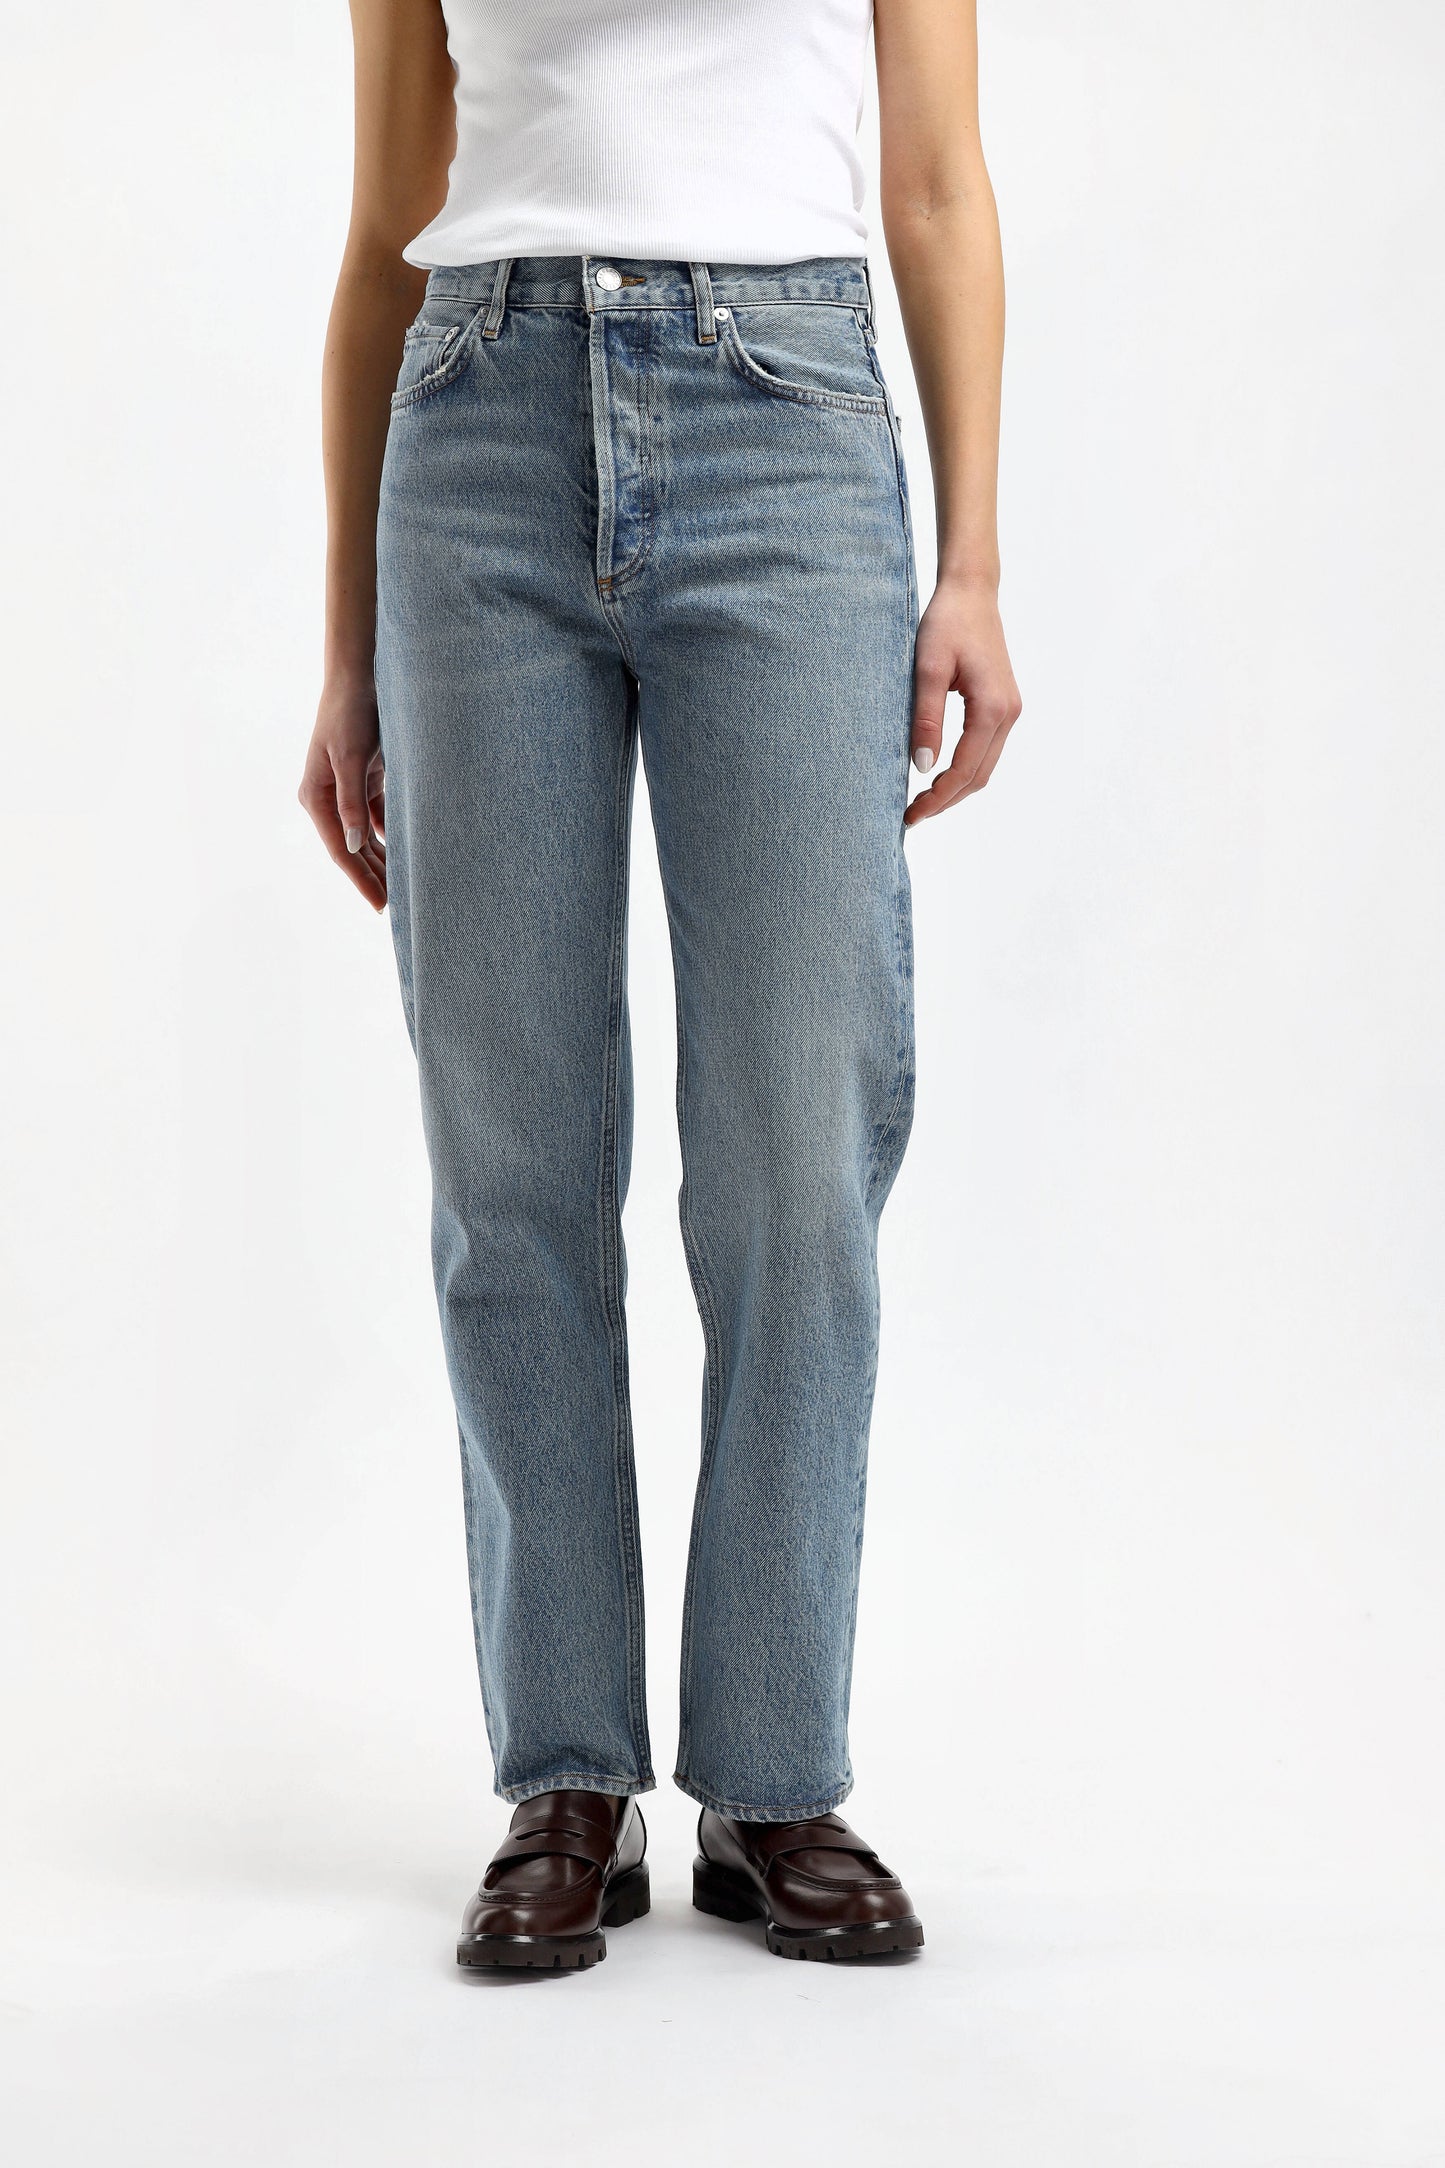 Jeans 90s Pinch in NavigateAgolde - Anita Hass